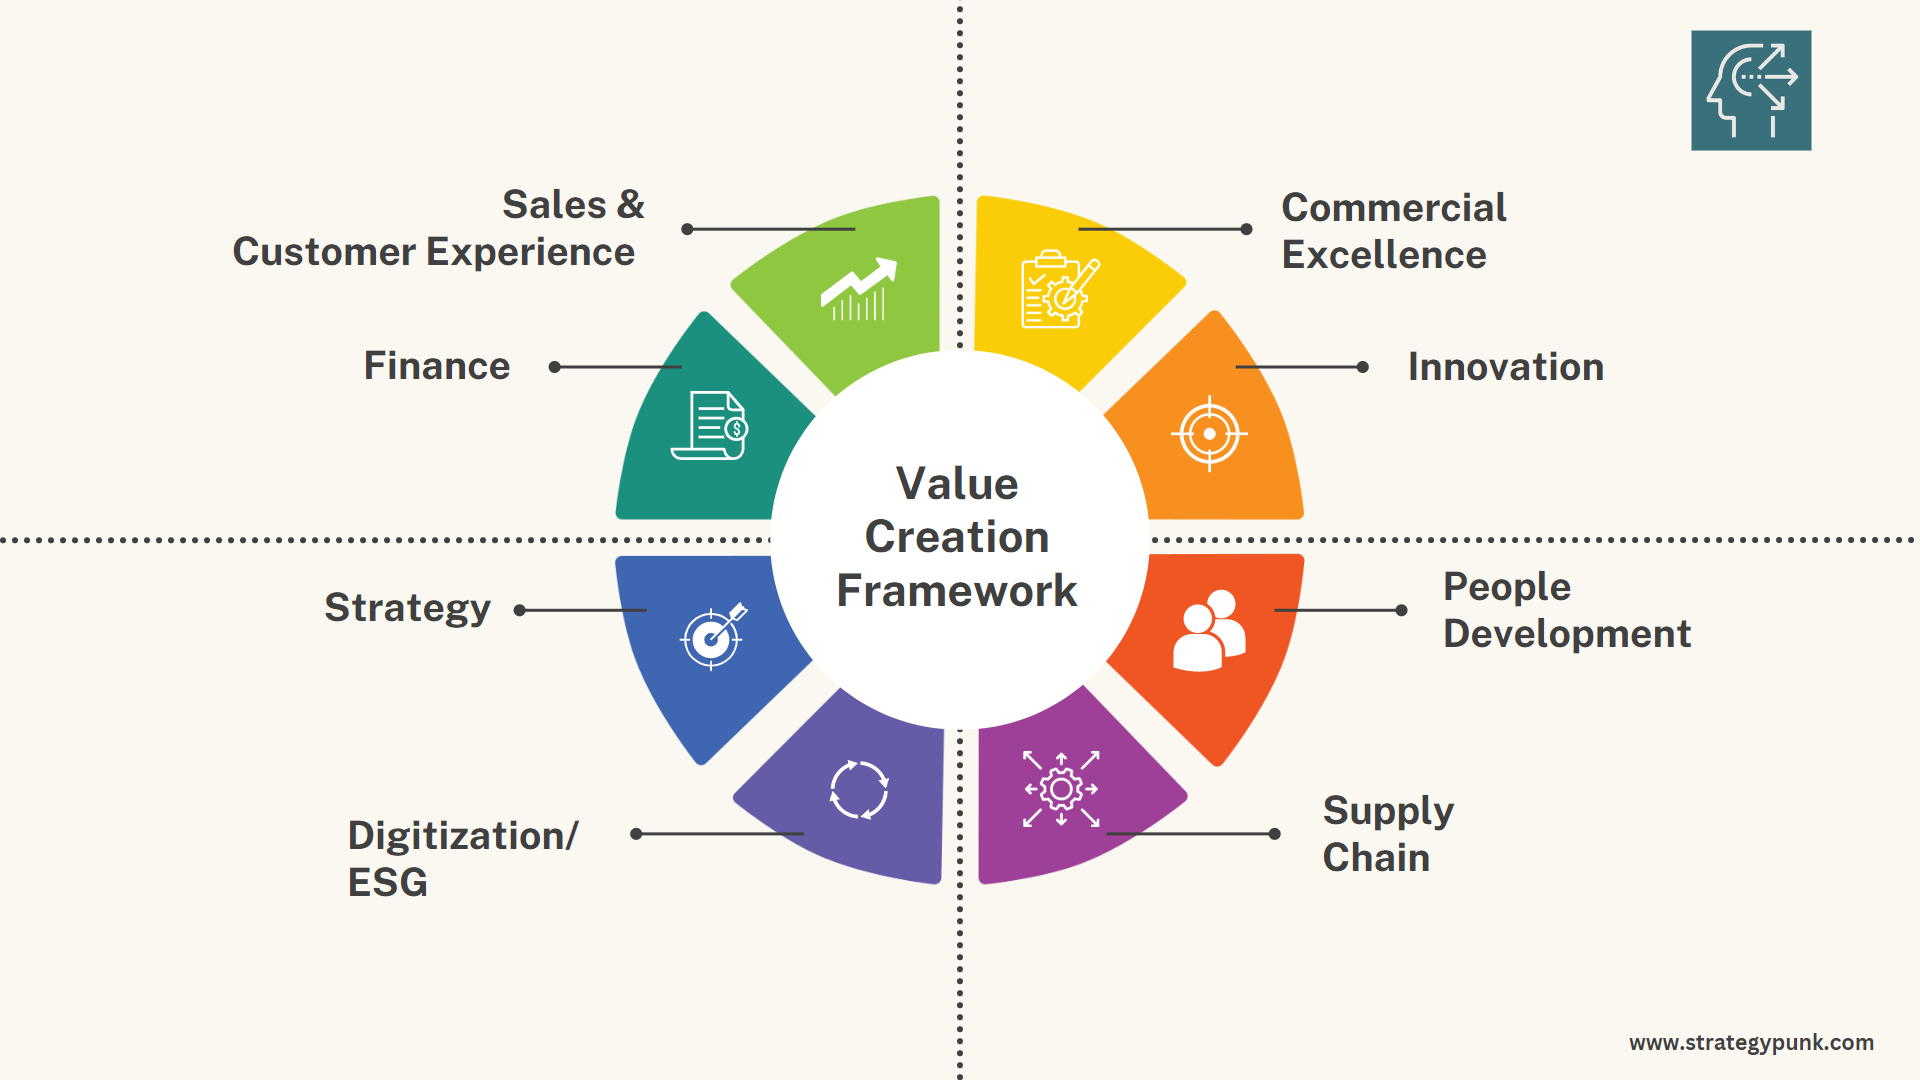 Building a Value Creation Framework (Free PowerPoint Template Included)